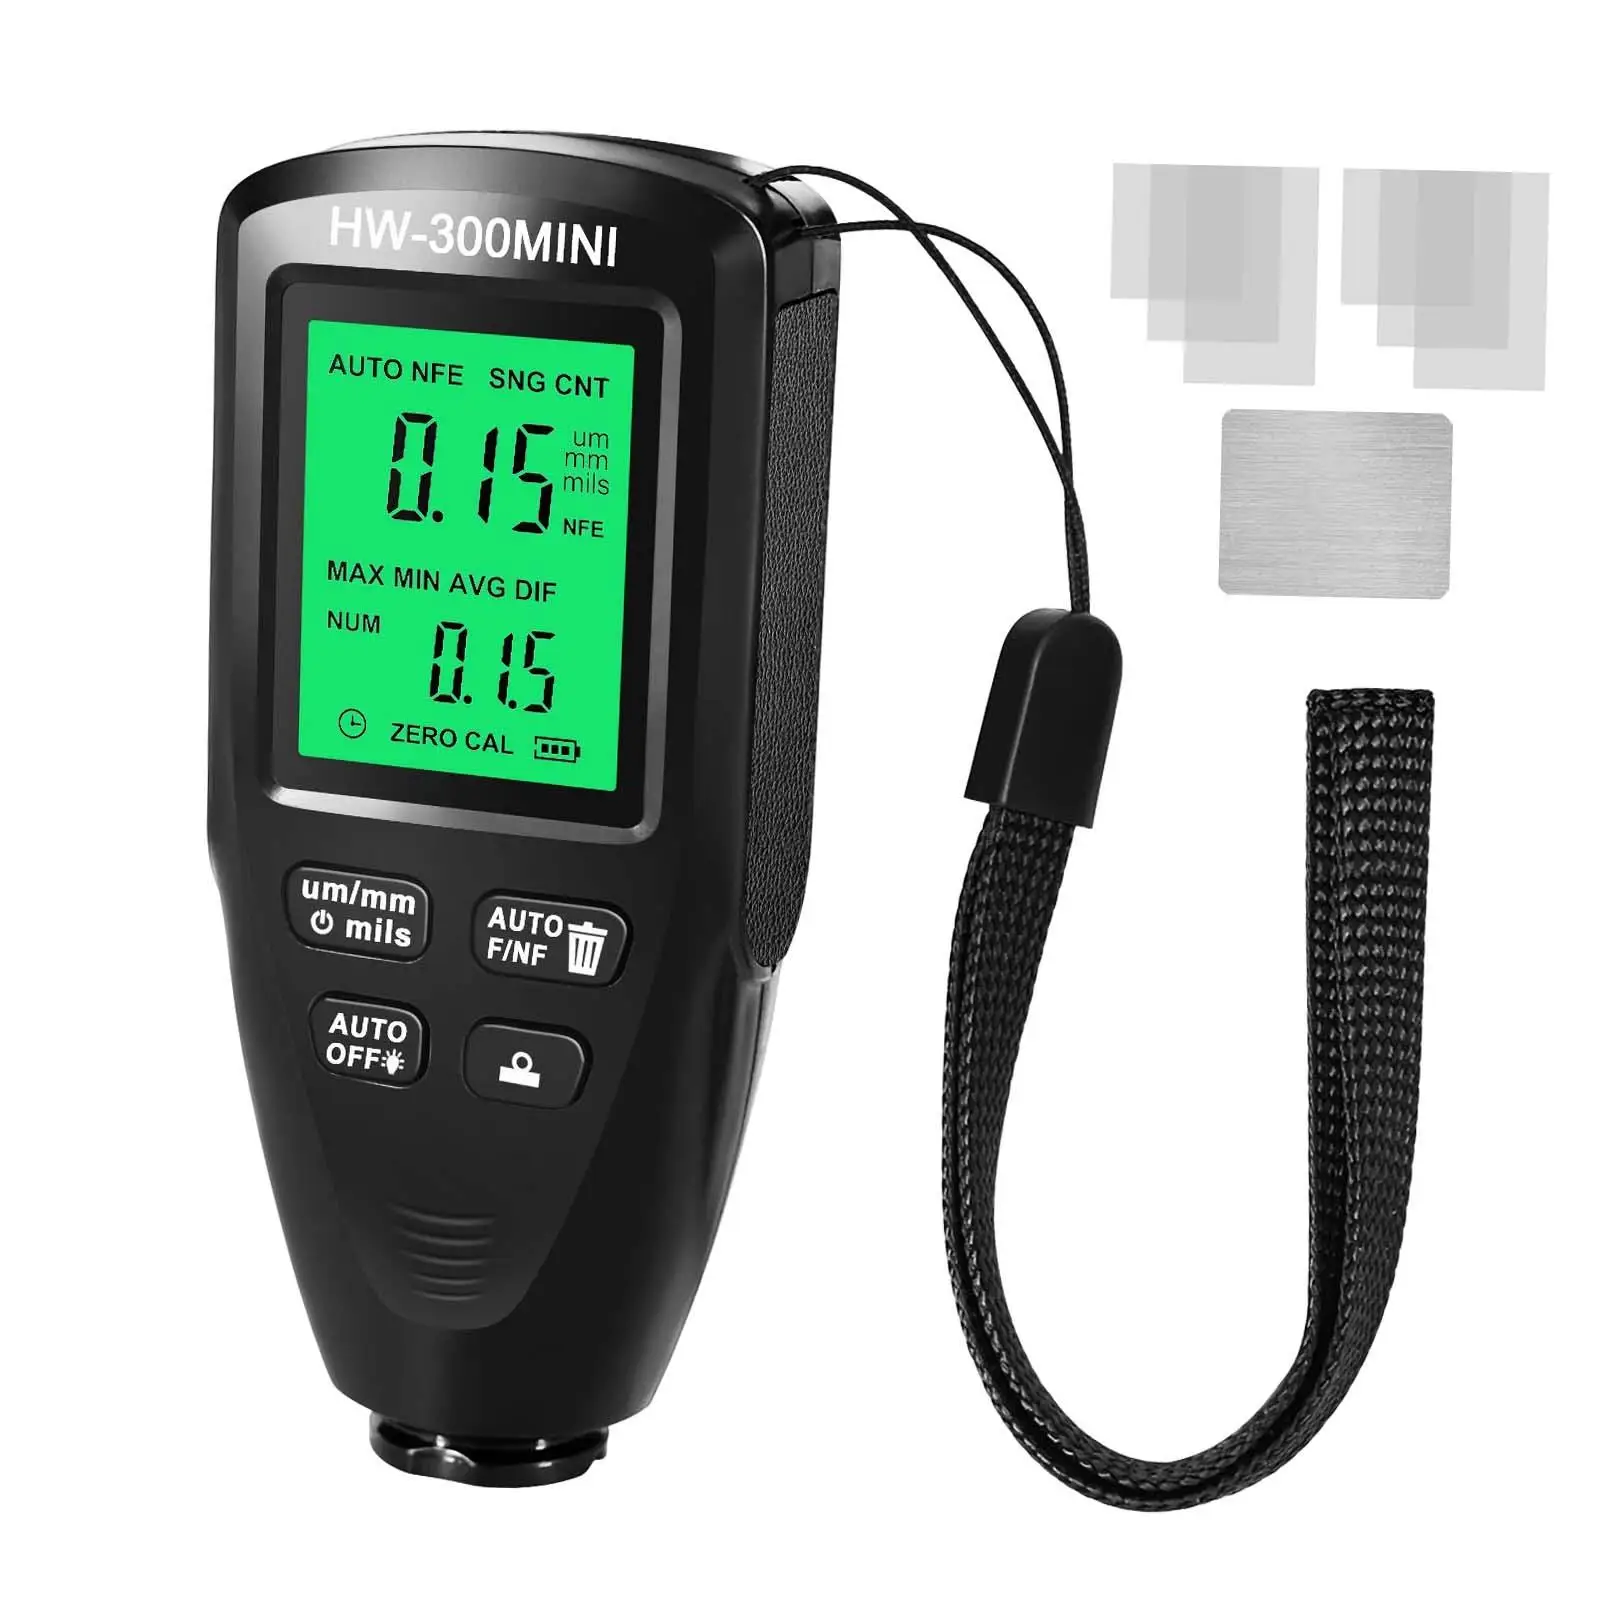 Painting Depth Gauge with Backlight LCD Display Measuring Coating Thickness Meter for Workshops Automotive Used Car Buyers